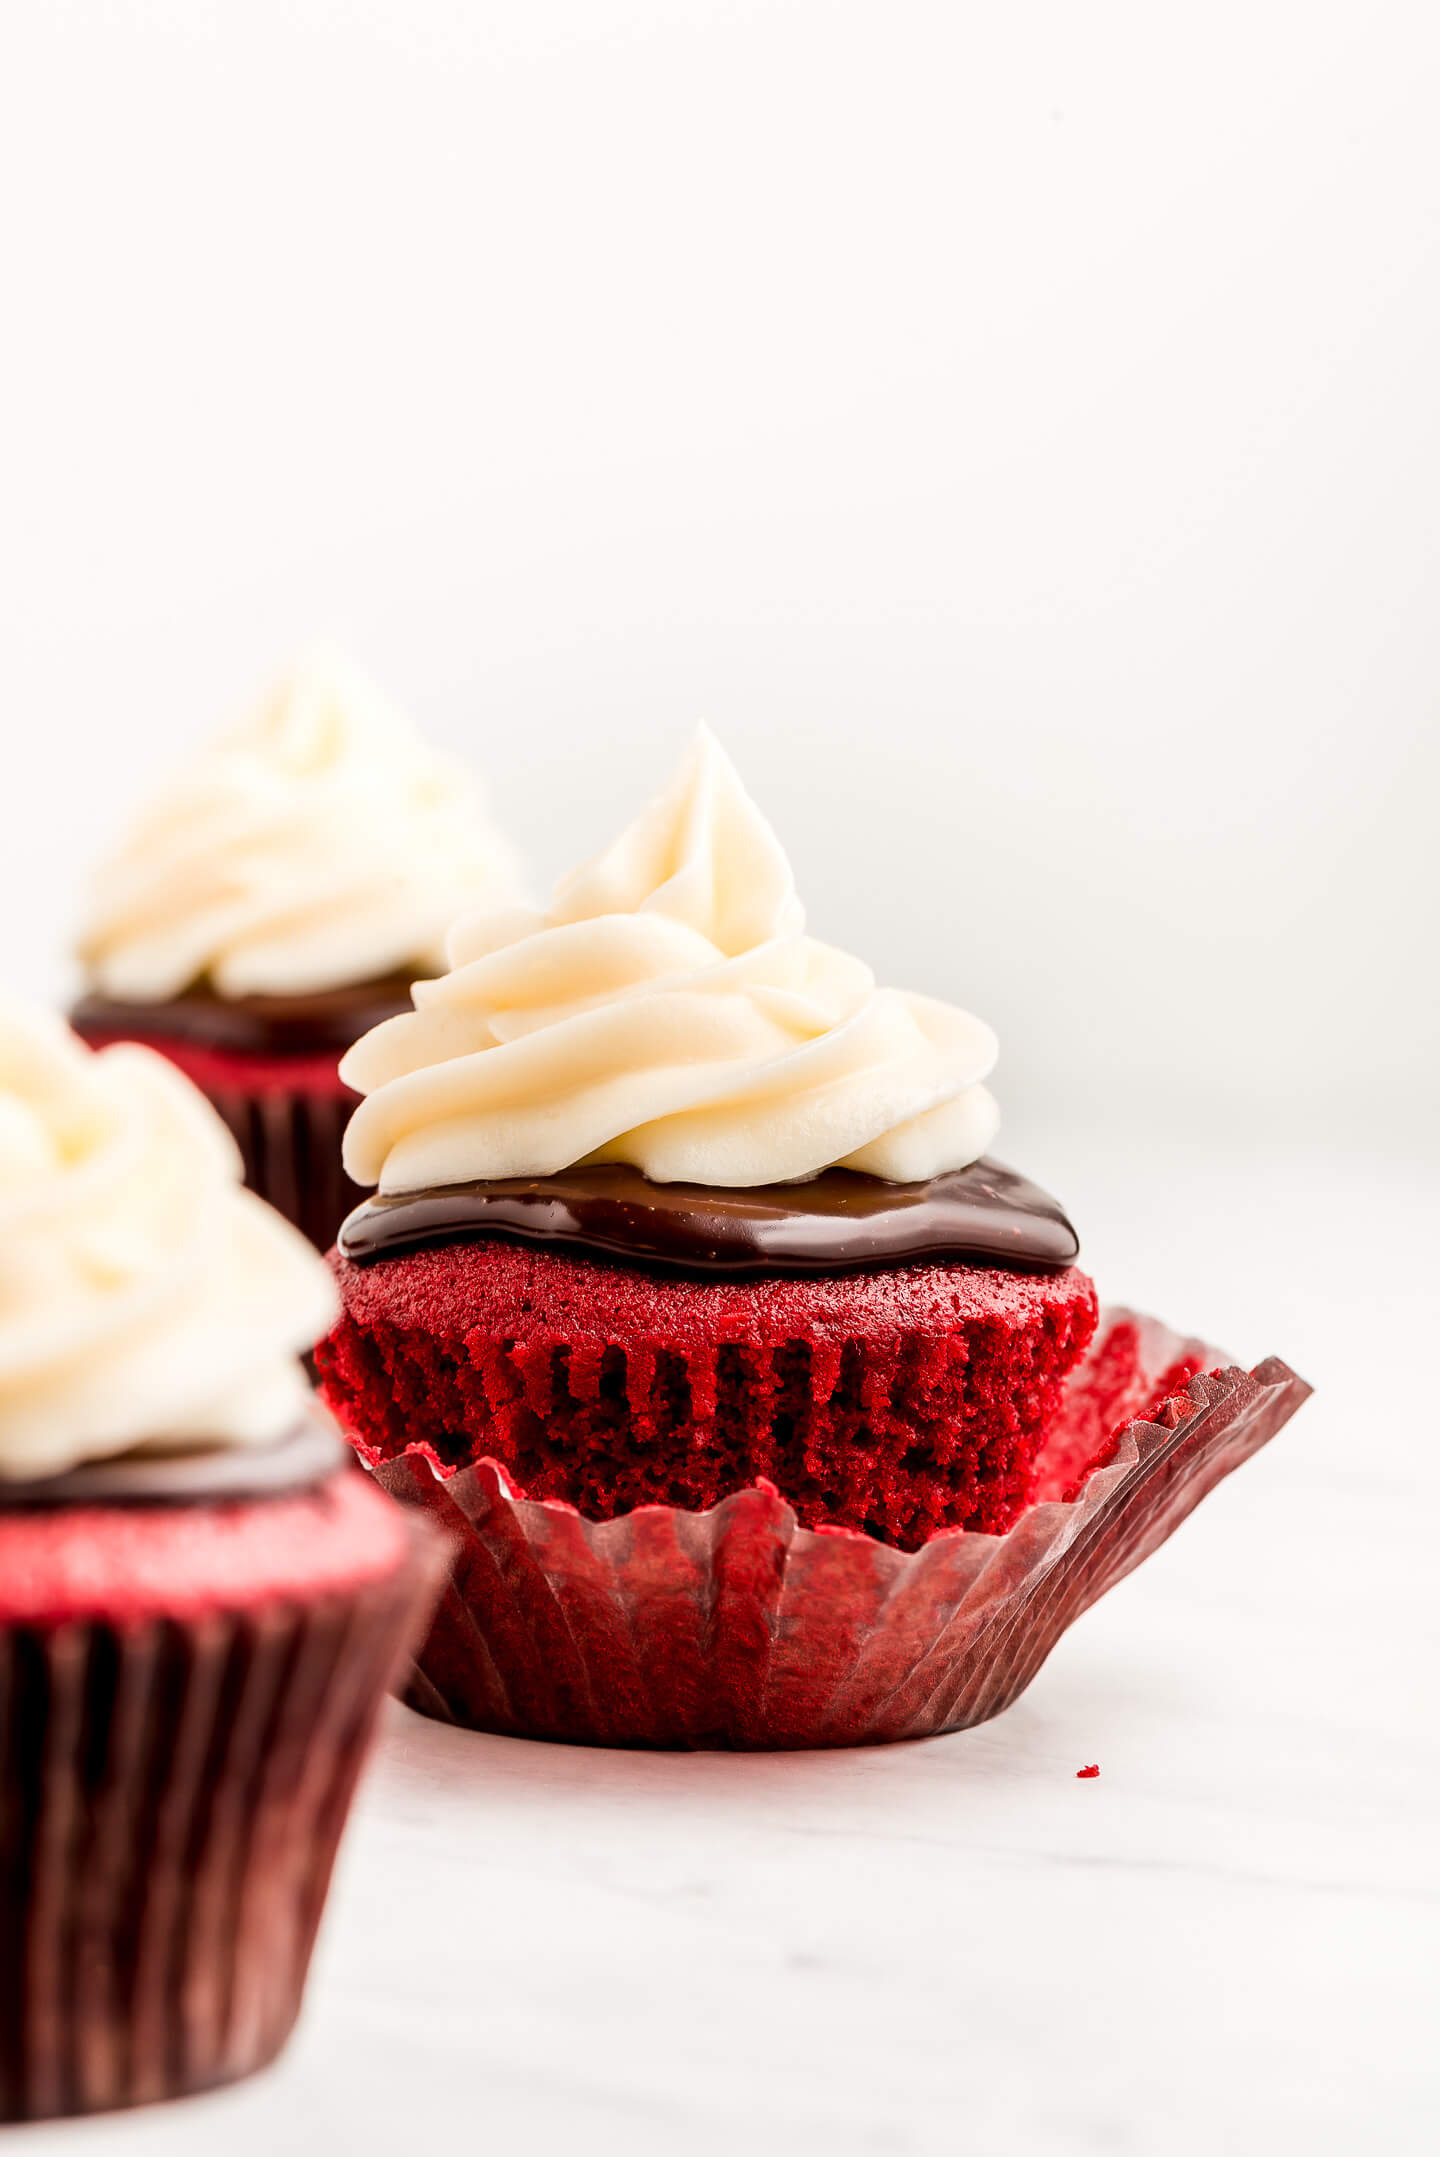 An unwrapped Red Velvet Cupcake with Cream Cheese Frosting and ganache.